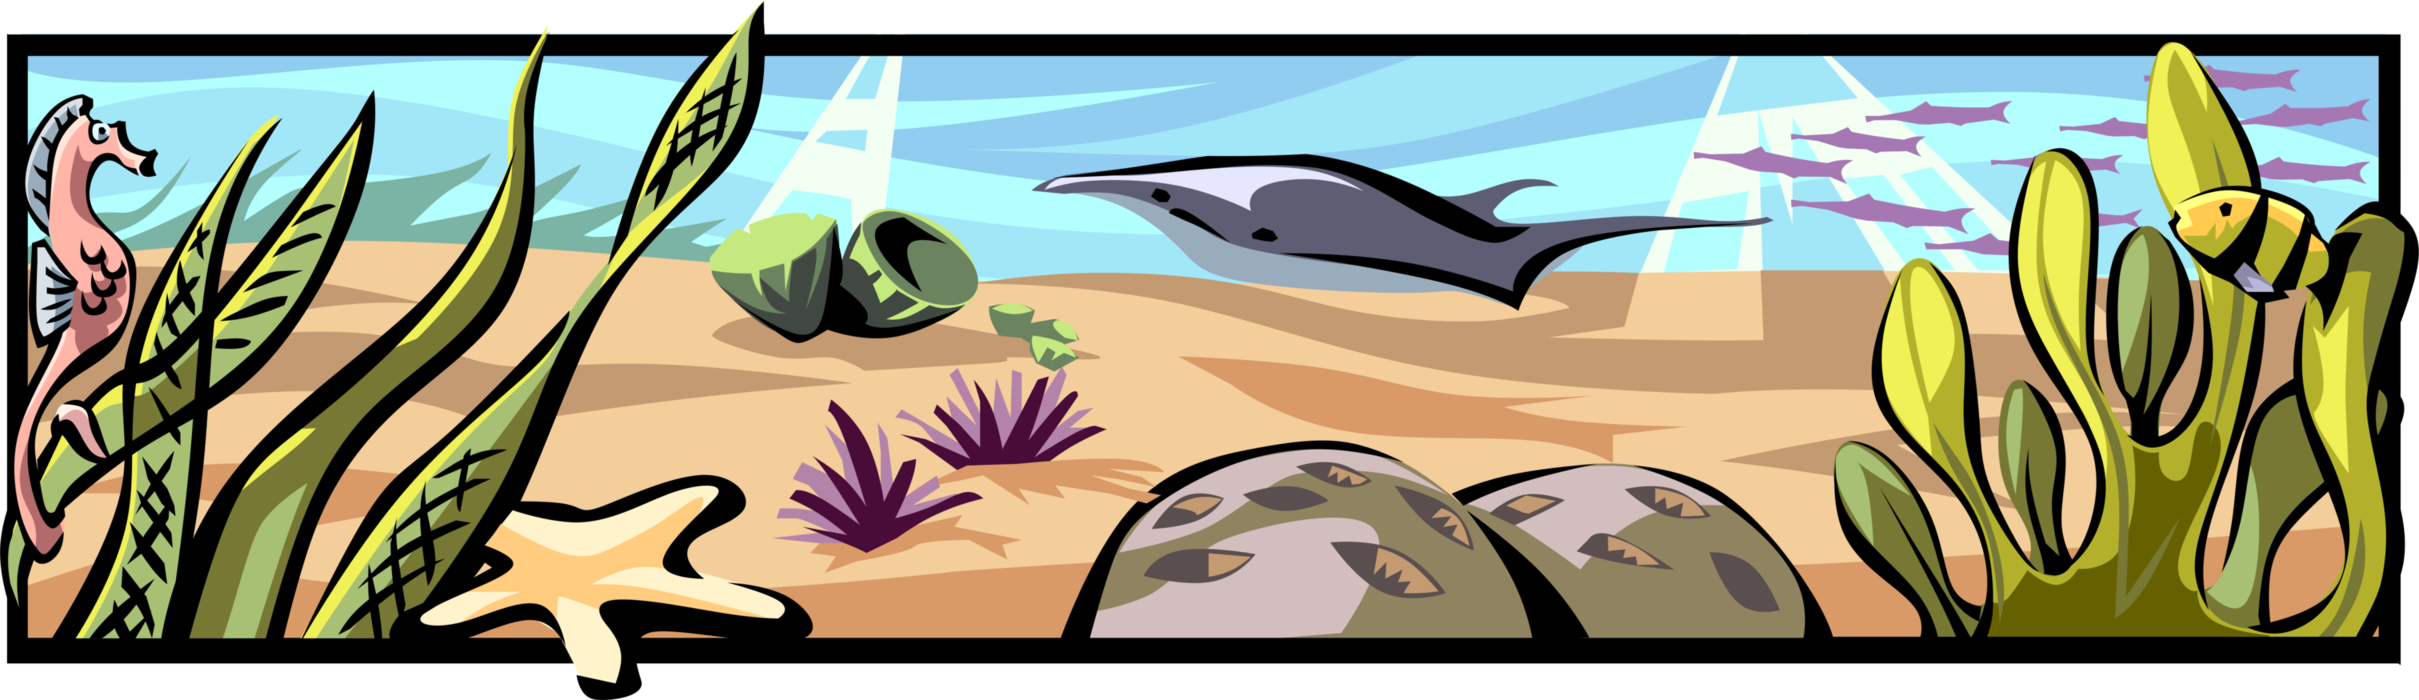 Vector Illustration of Underwater Ocean Seabed with Marine Aquatic Fish and Manta Ray